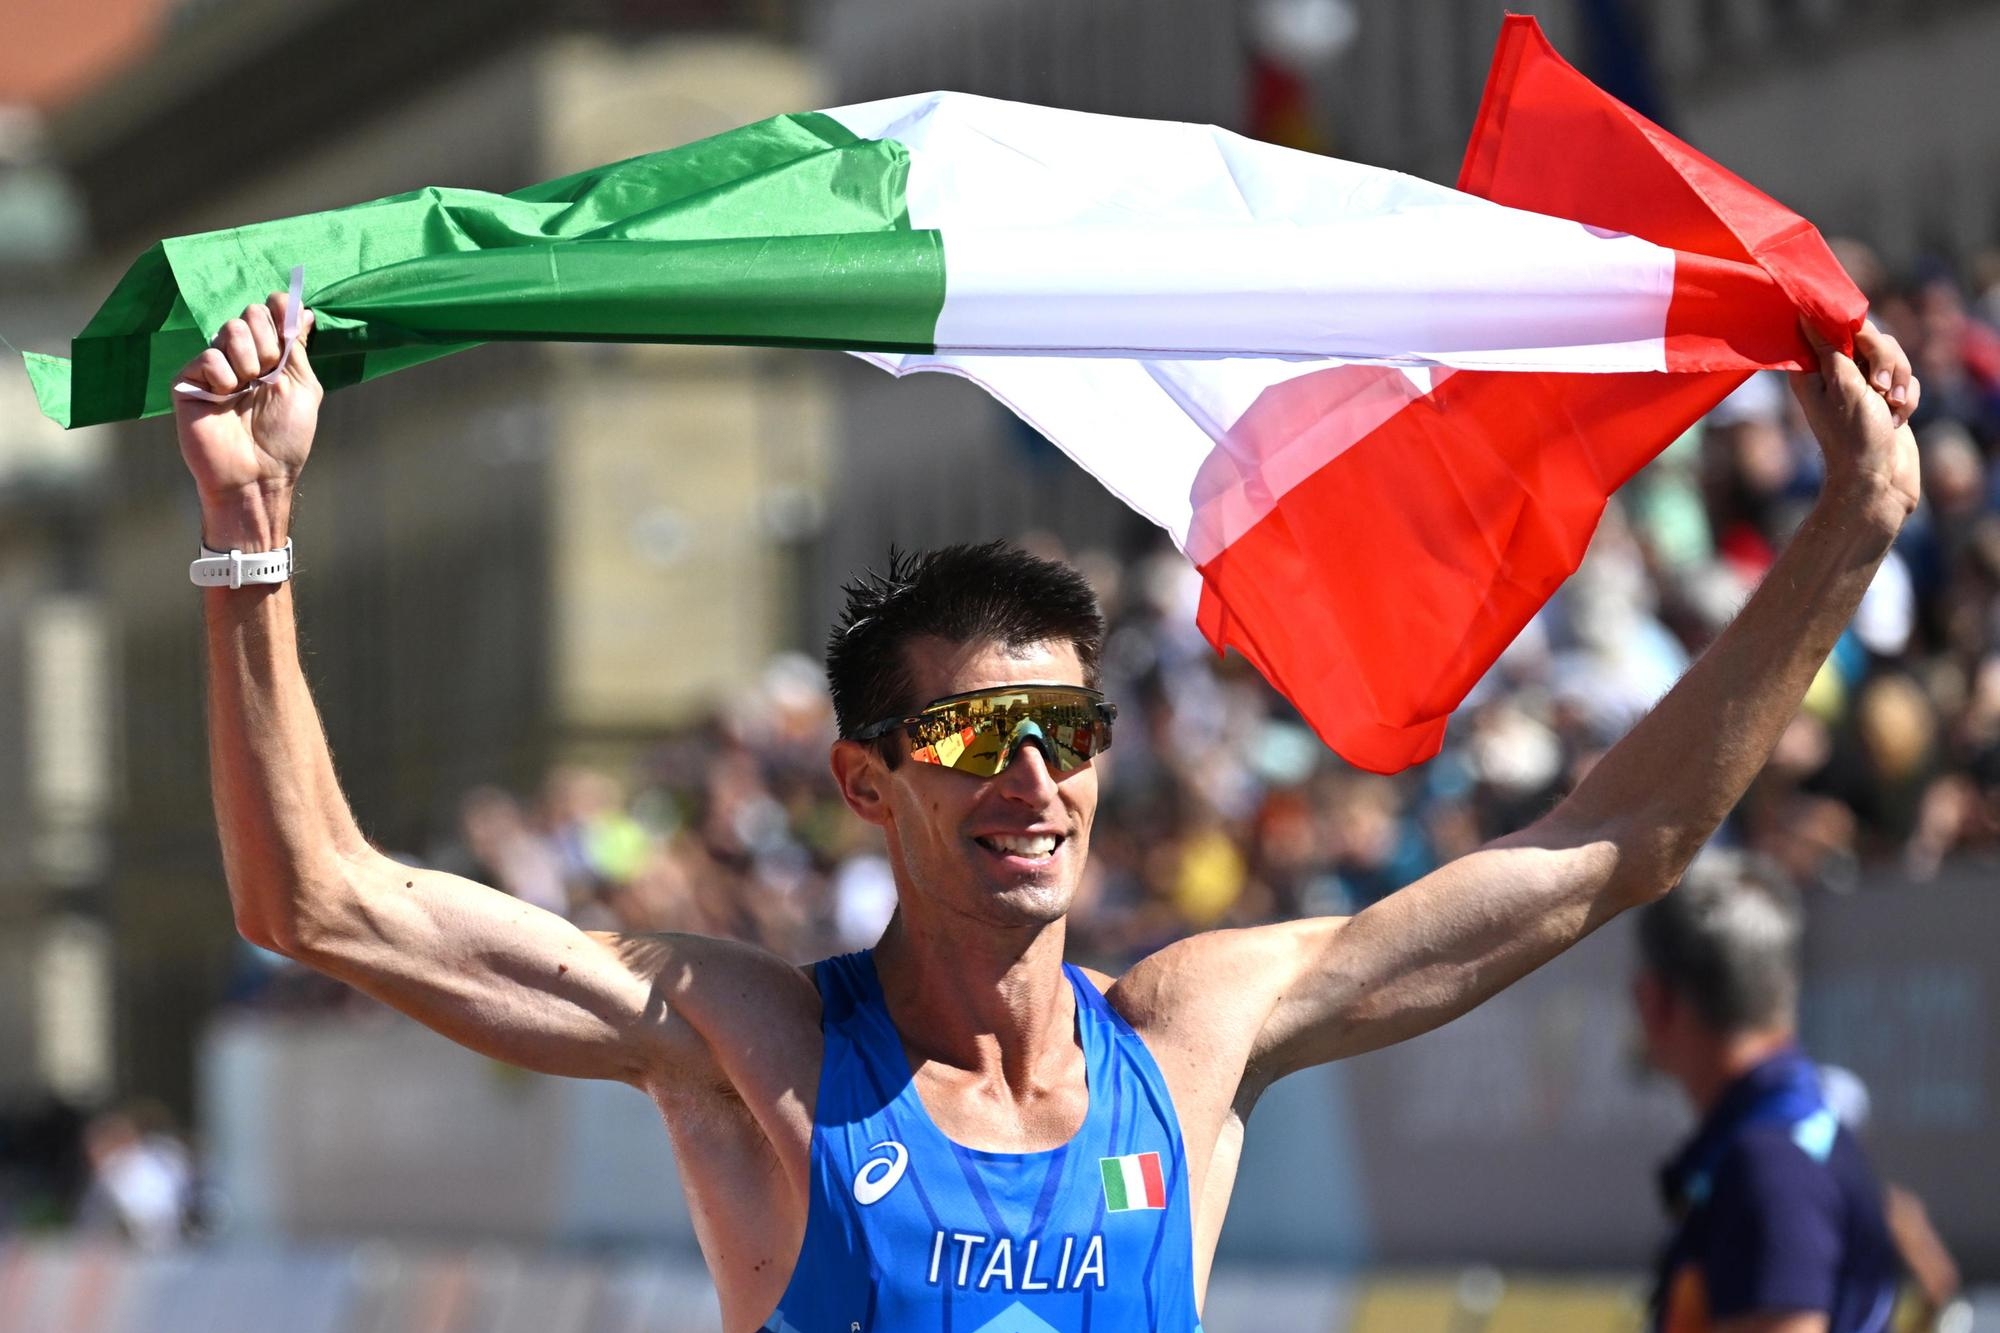 epa10123875 Matteo Giupponi of Italy celebrates after placing third in the men's 35km Race Walk during the Athletics events at the European Championships Munich 2022, Munich, Germany, 16 August 2022. The championships will feature nine Olympic sports, Athletics, Beach Volleyball, Canoe Sprint, Cycling, Artistic Gymnastics, Rowing, Sport Climbing, Table Tennis and Triathlon. EPA/FILIP SINGER